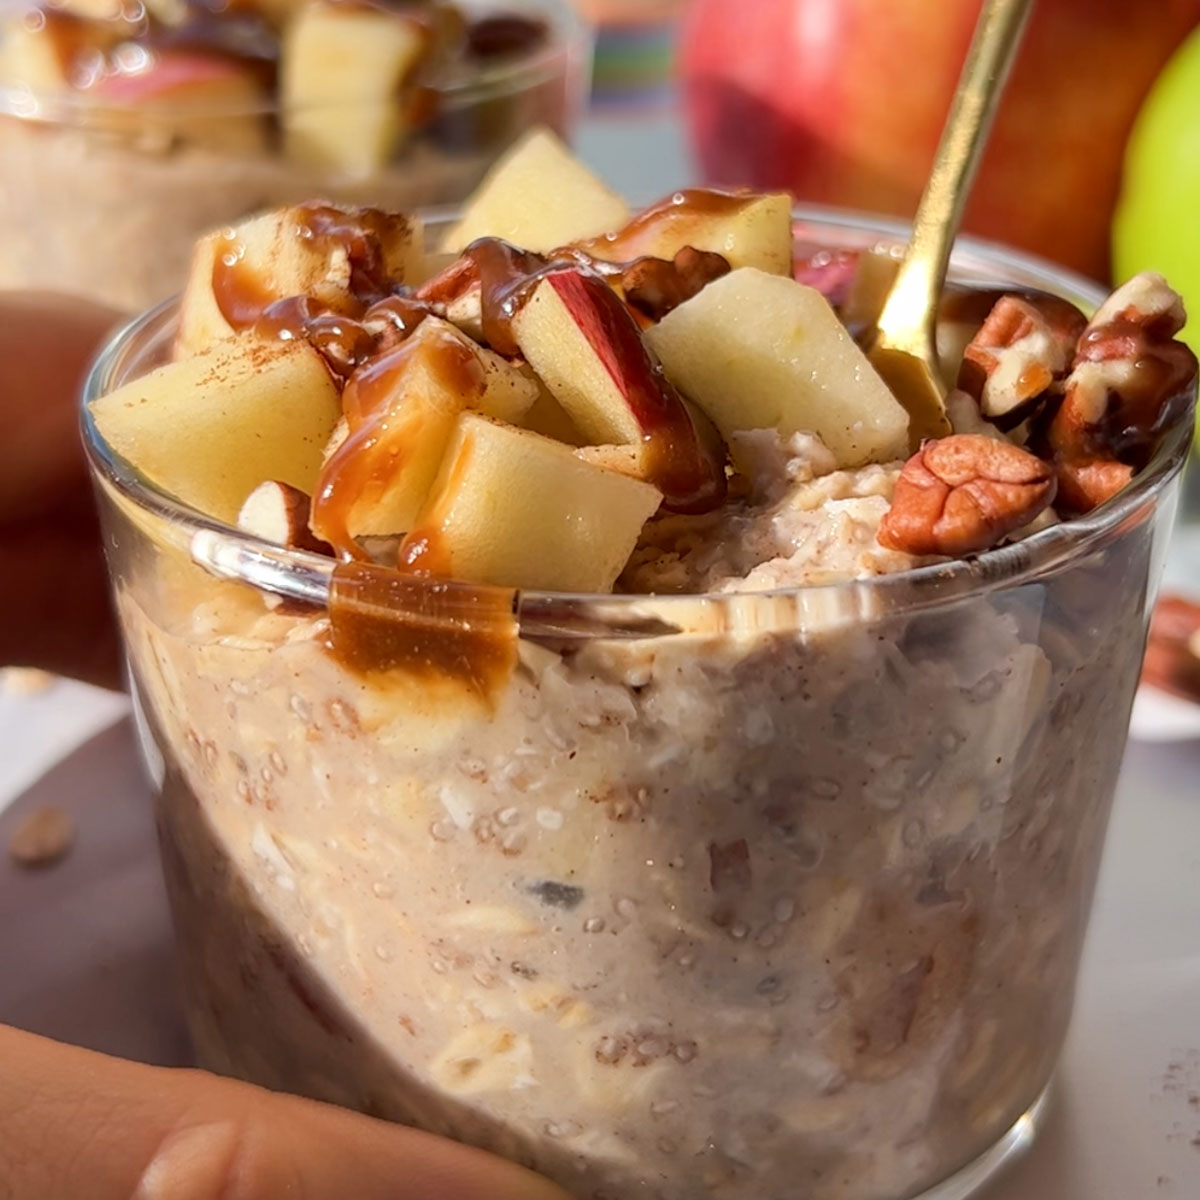 A spoon dipping into apple overnight oats in a jar topped with pecans, apple pieces, and caramel sauce.